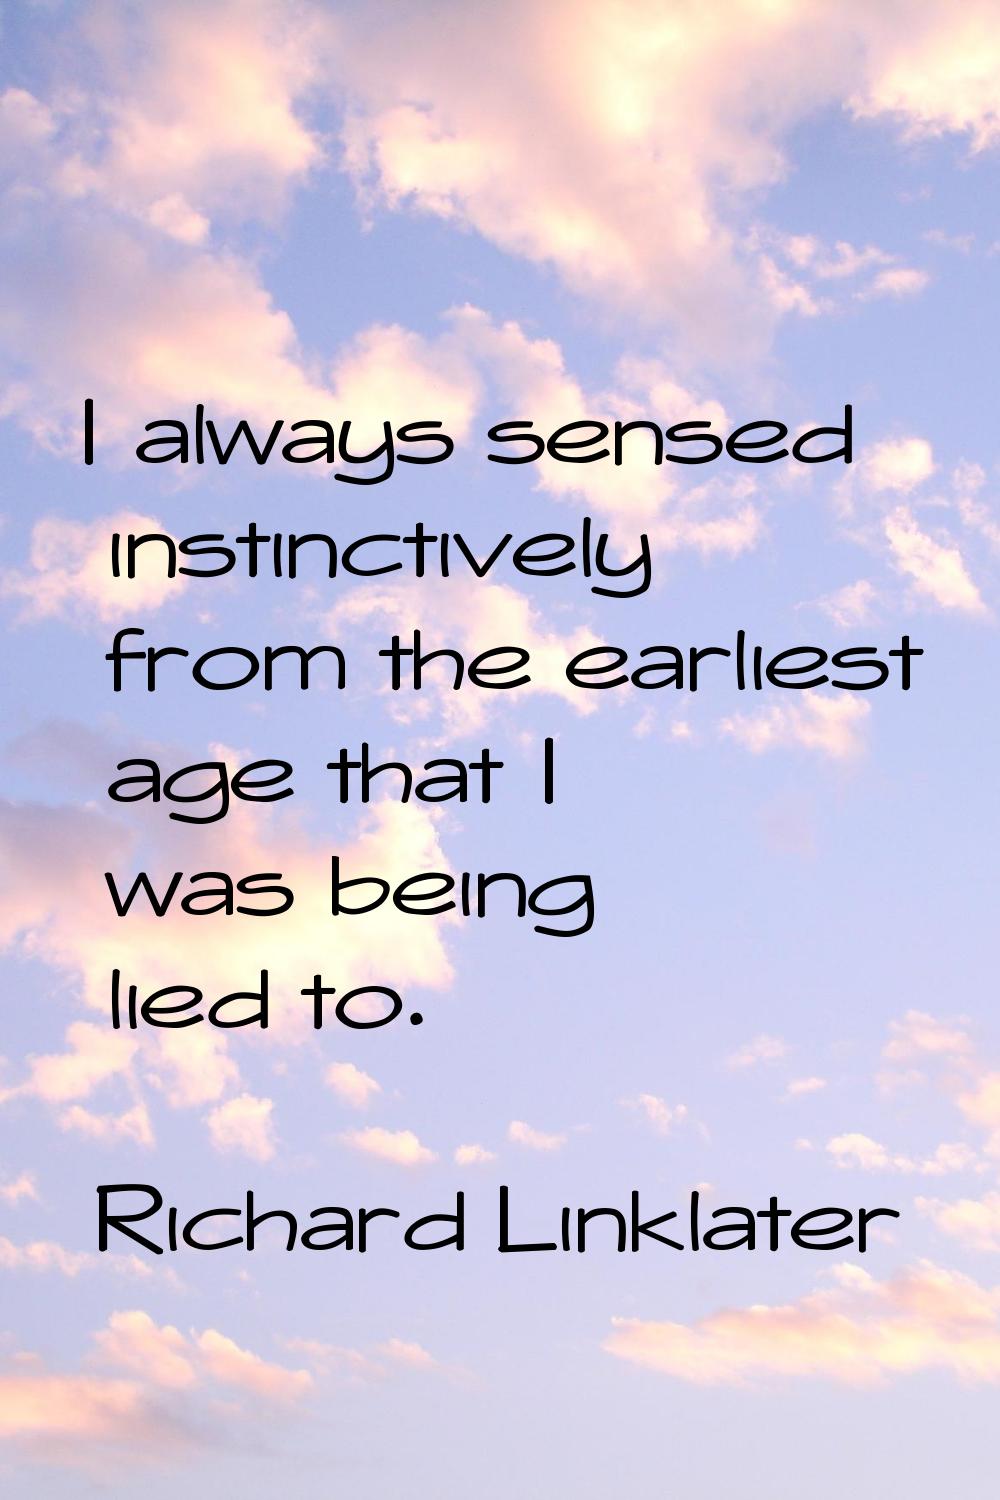 I always sensed instinctively from the earliest age that I was being lied to.